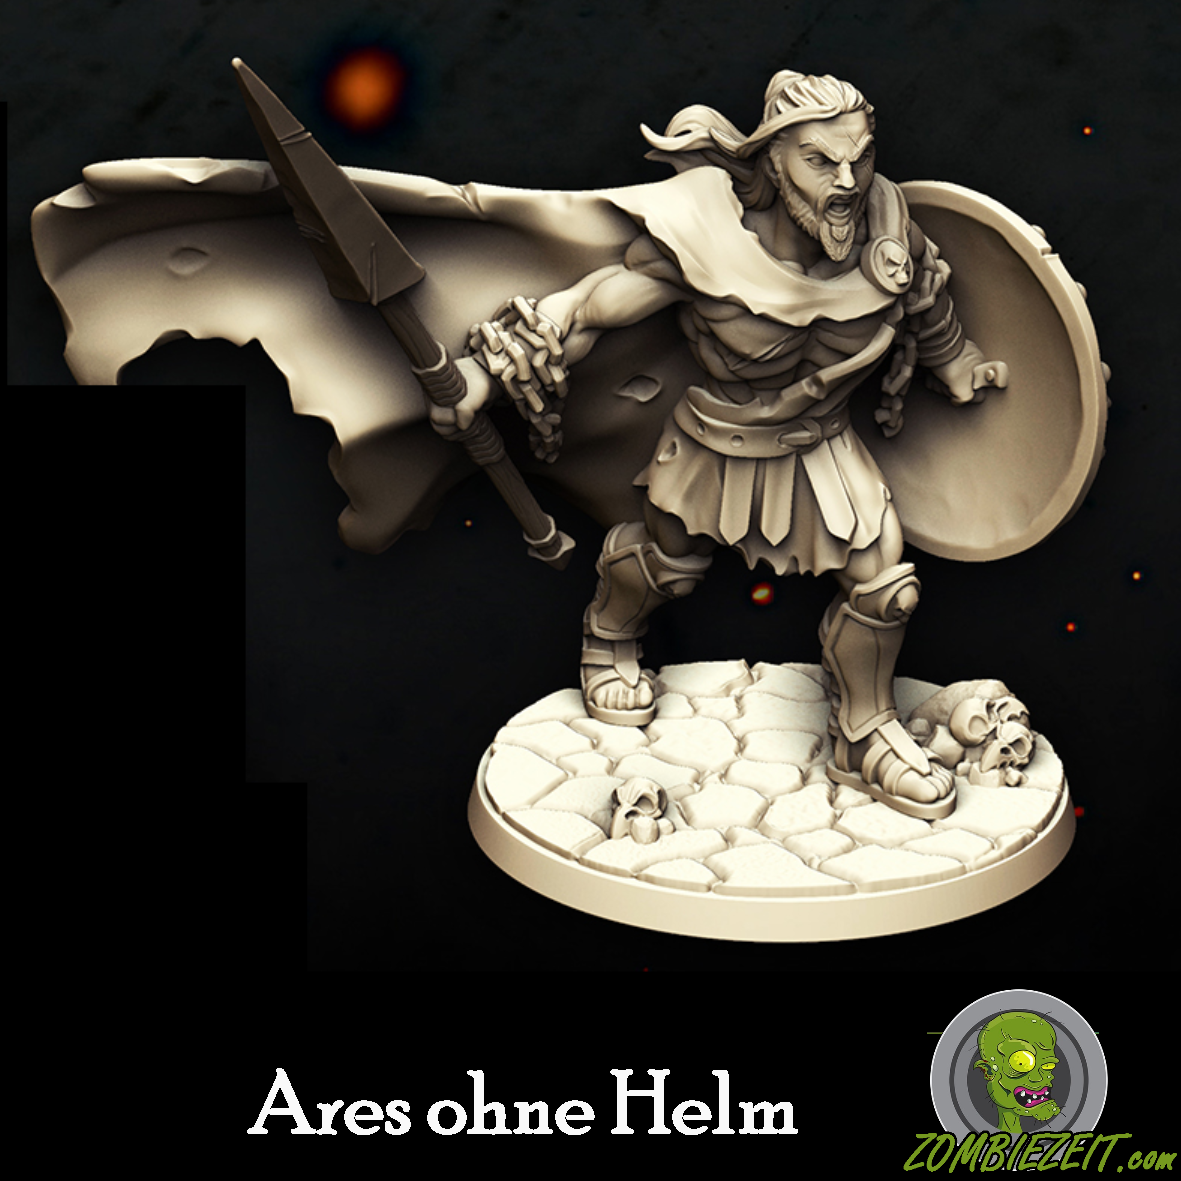 Ares ohne Helm